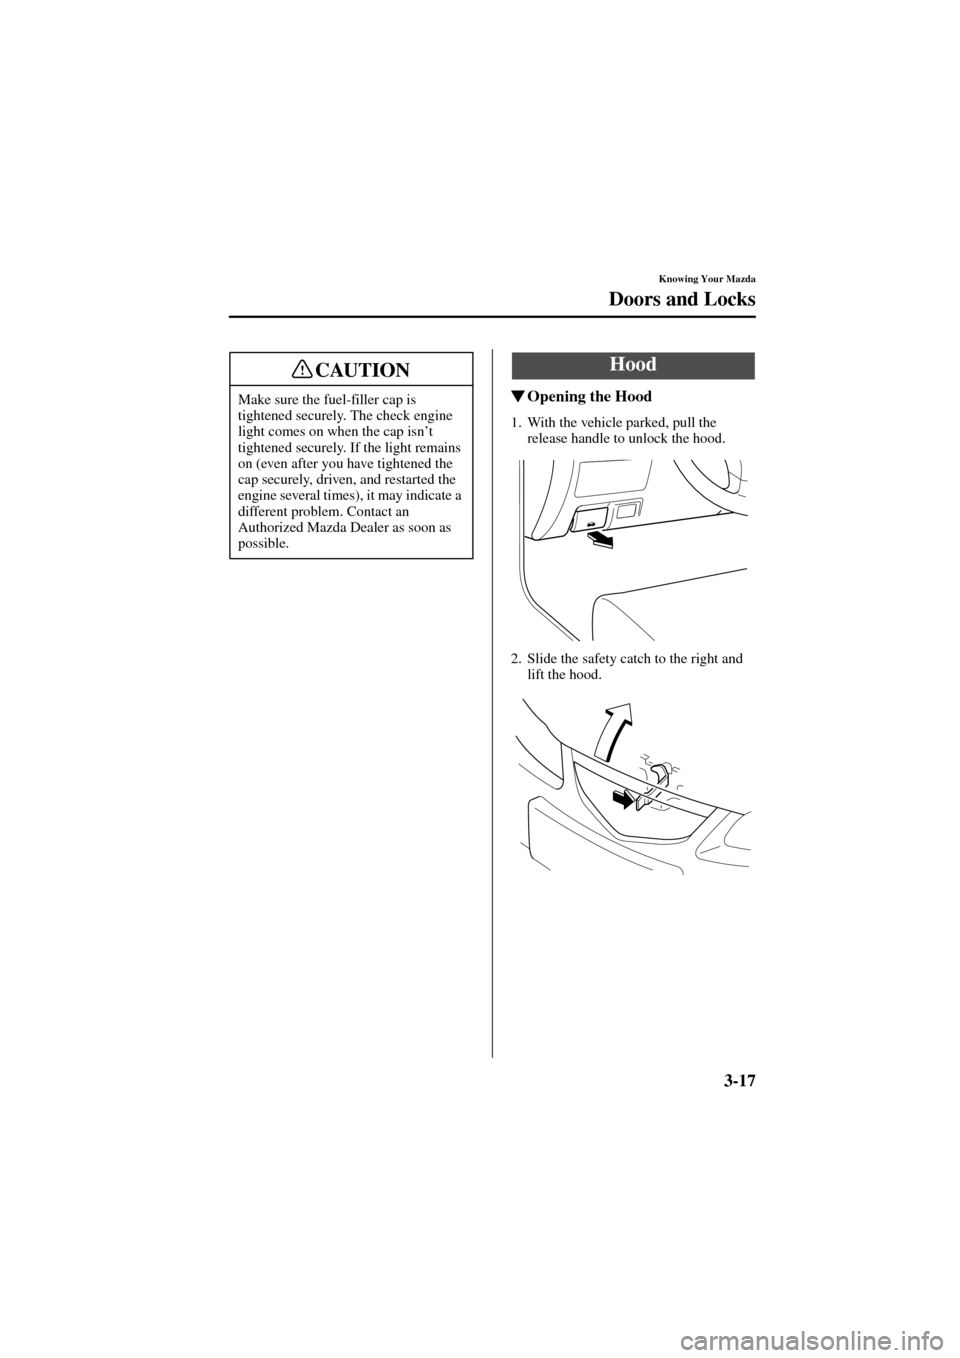 MAZDA MODEL 6 2004  Owners Manual (in English) 3-17
Knowing Your Mazda
Doors and Locks
Form No. 8R29-EA-02I
Opening the Hood
1. With the vehicle parked, pull the 
release handle to unlock the hood.
2. Slide the safety catch to the right and 
lift